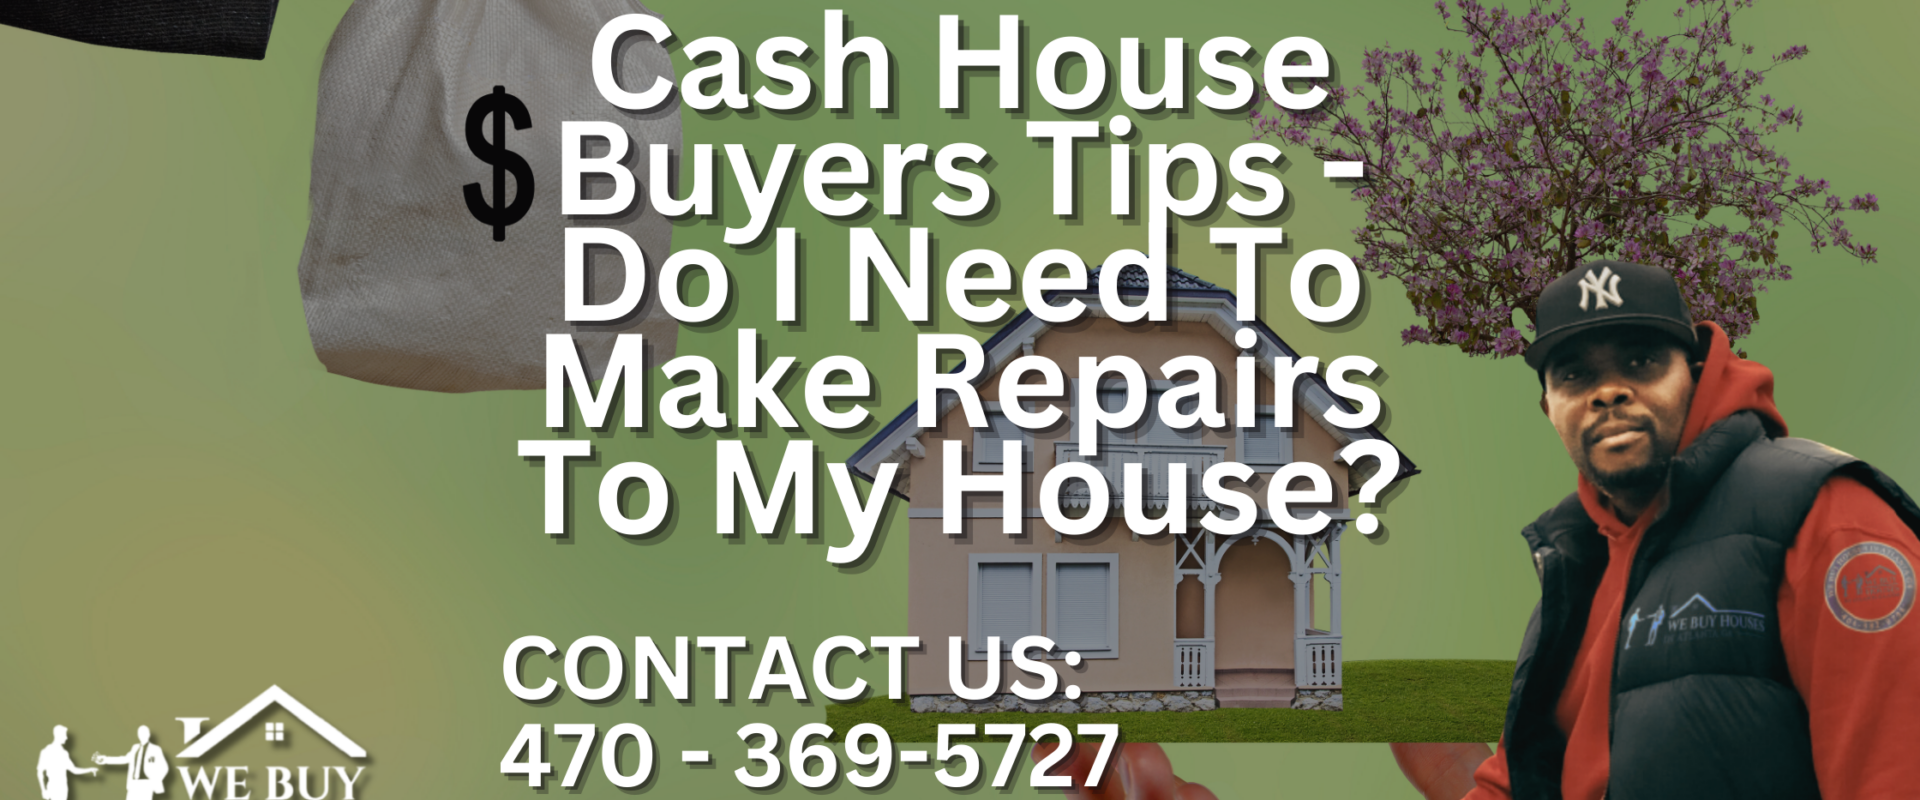 Cash House Buyers Tips - Do I Need To Make Repairs To My House?